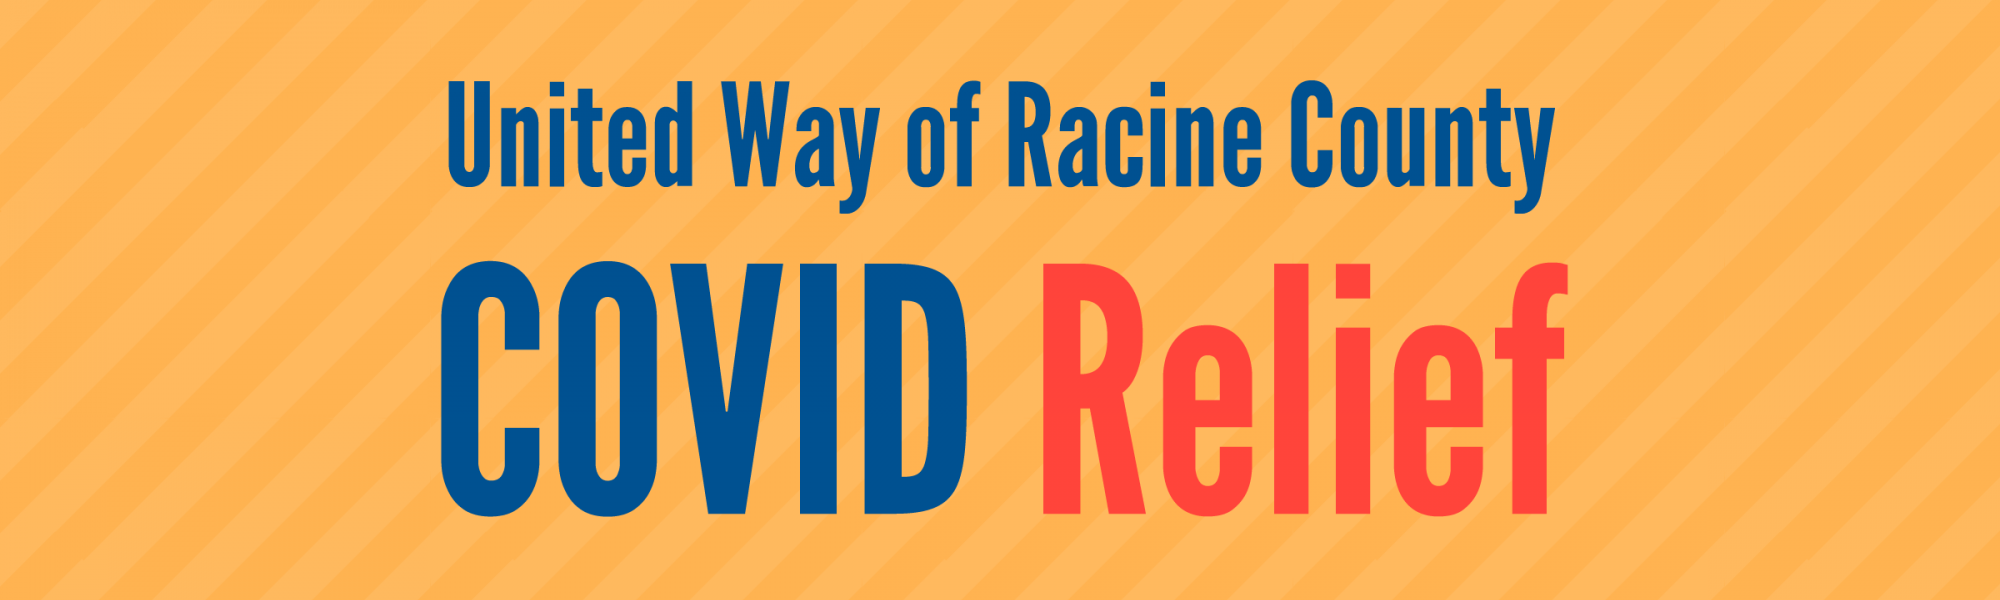 Dark blue and red text that says "United Way of Racine County COVID Relief" on a yellow-striped background.